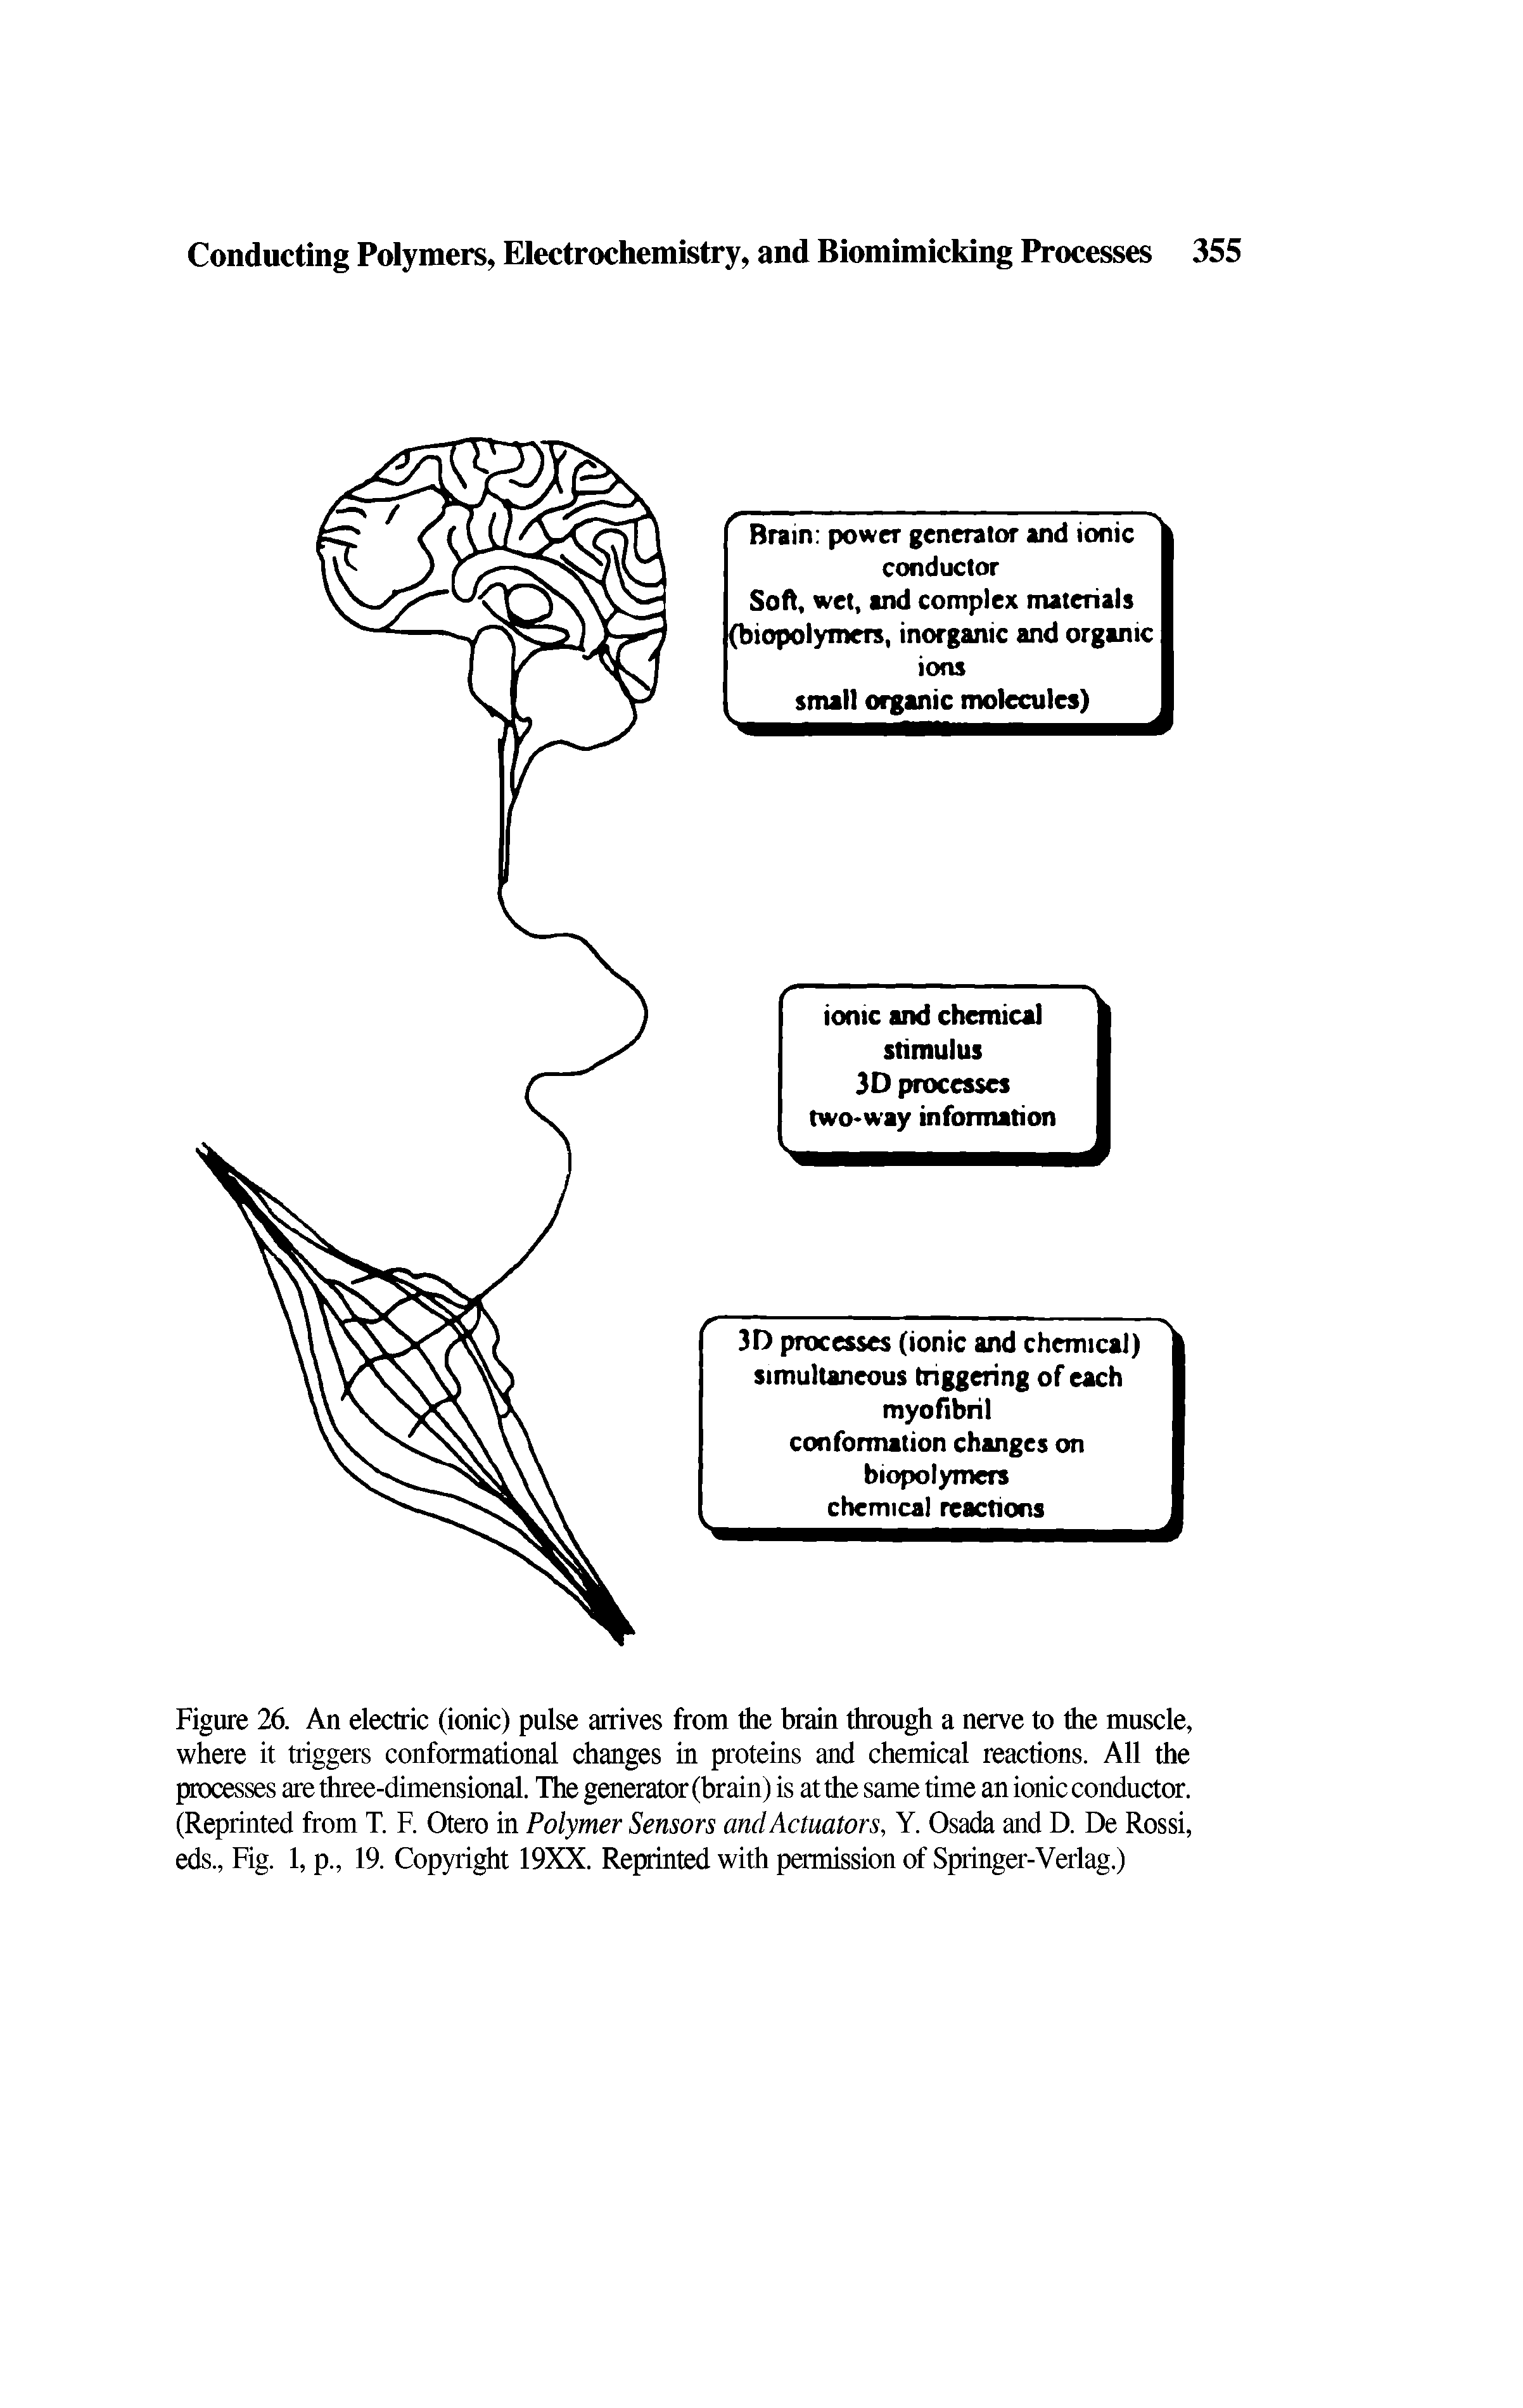 Figure 26. An electric (ionic) pulse arrives from the brain through a nerve to the muscle, where it triggers conformational changes in proteins and chemical reactions. All the processes are three-dimensional. The generator (brain) is at the same time an ionic conductor. (Reprinted from T. F. Otero in Polymer Sensors and Actuators, Y. Osada and D. De Rossi, eds., Fig. 1, p., 19. Copyright 19XX. Reprinted with permission of Springer-Verlag.)...